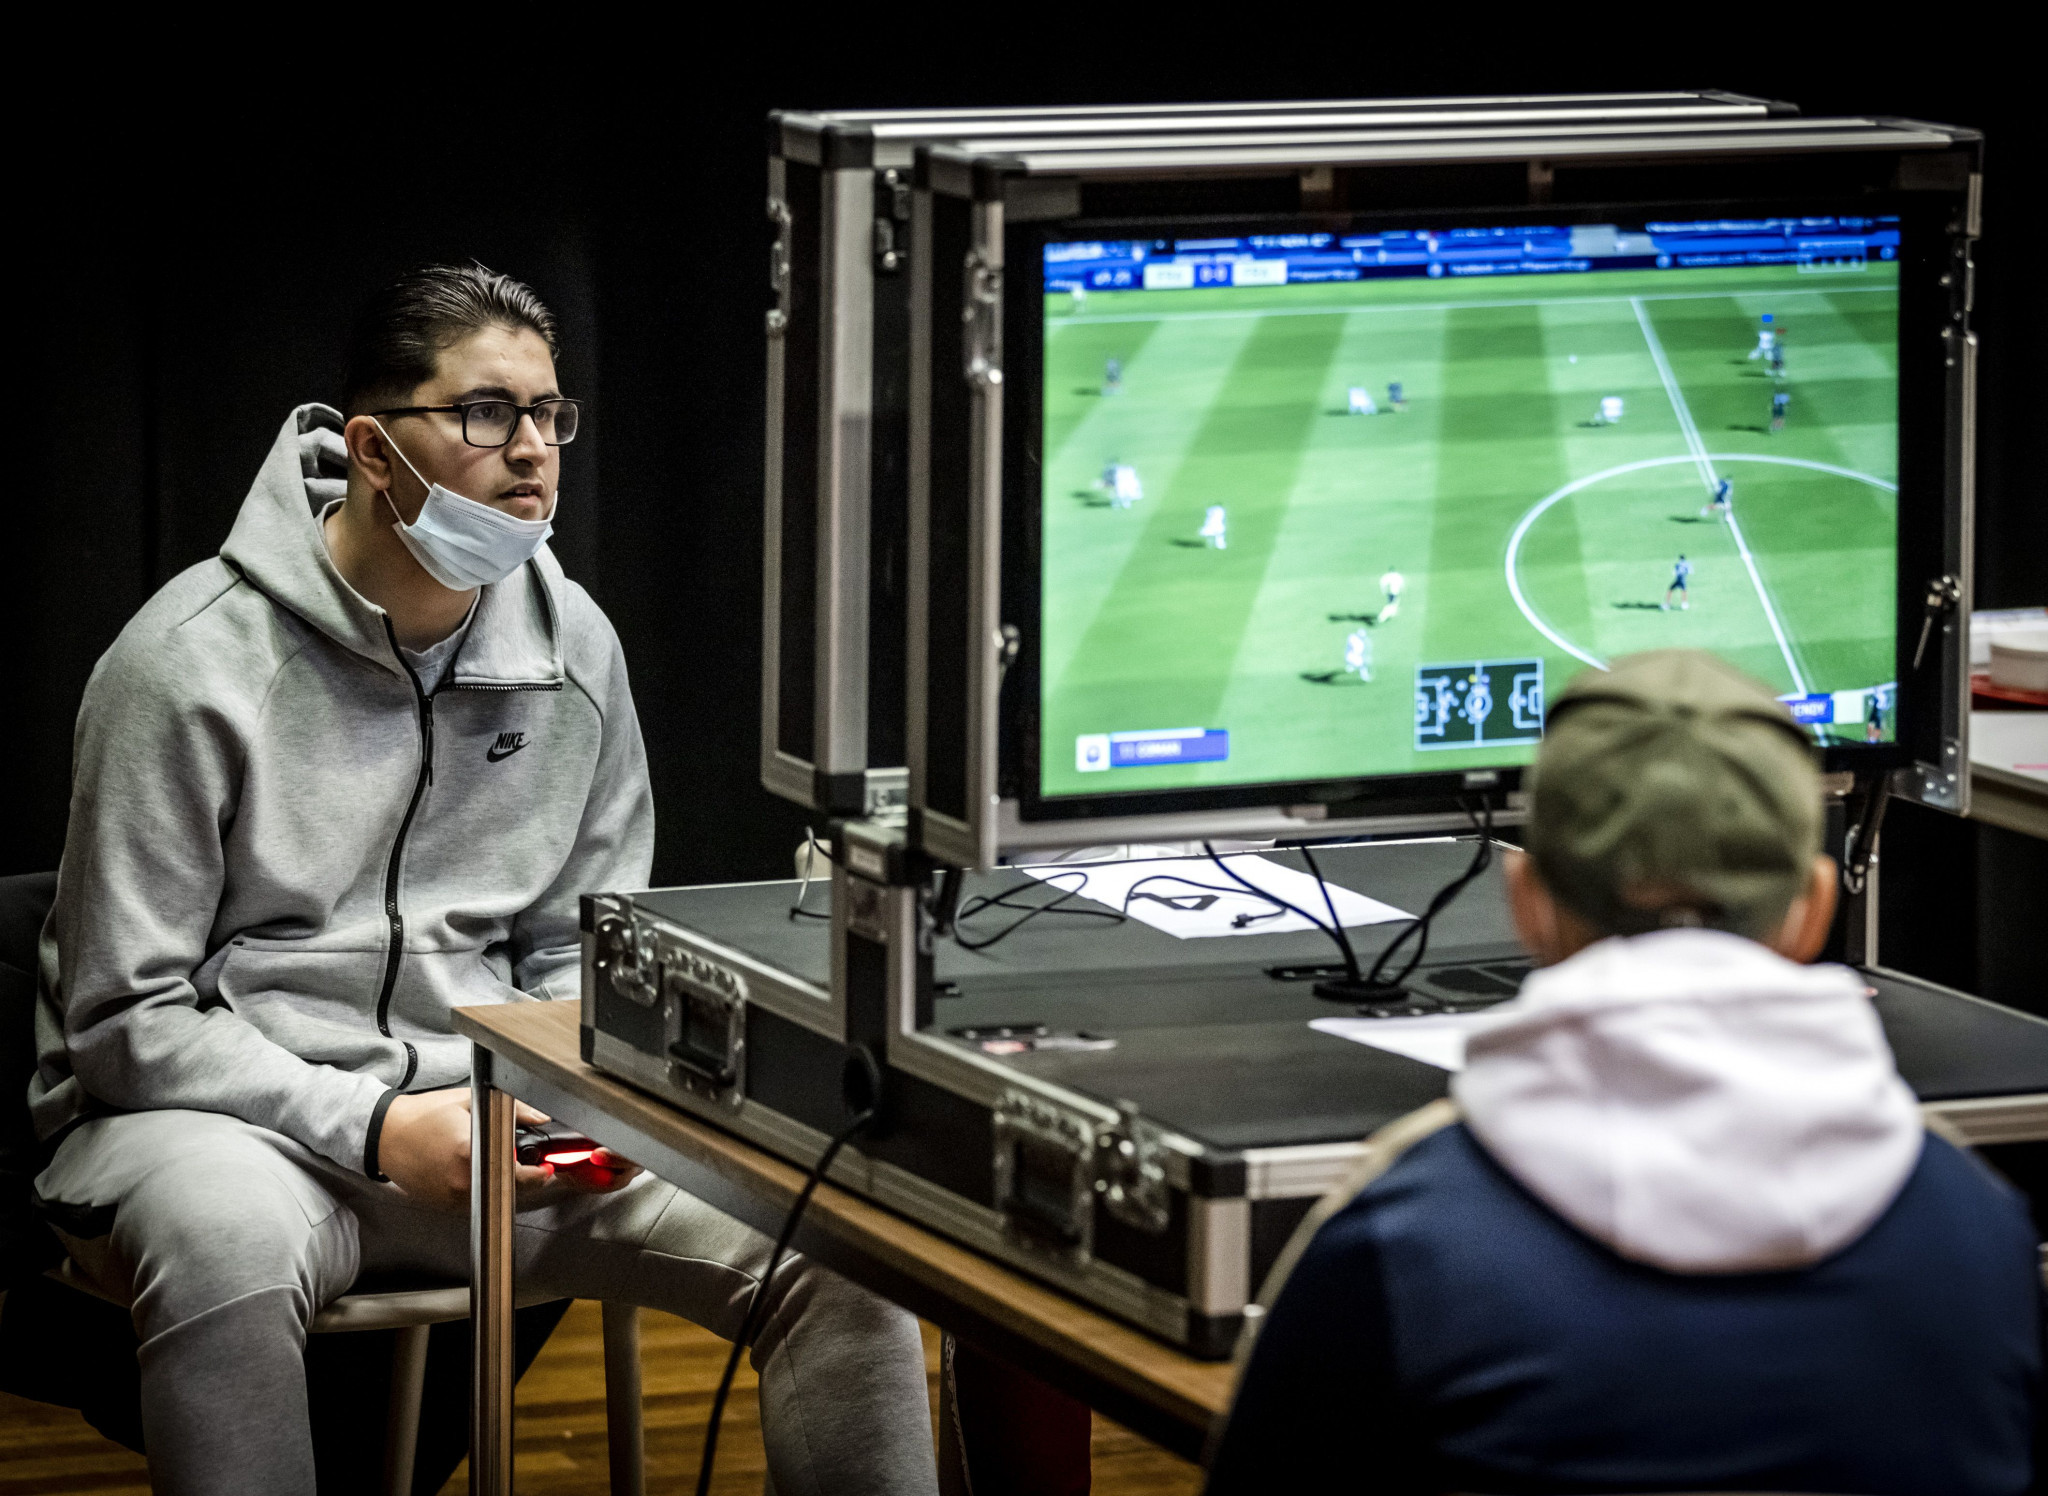 More players to compete as return of FIFAe Finals announced